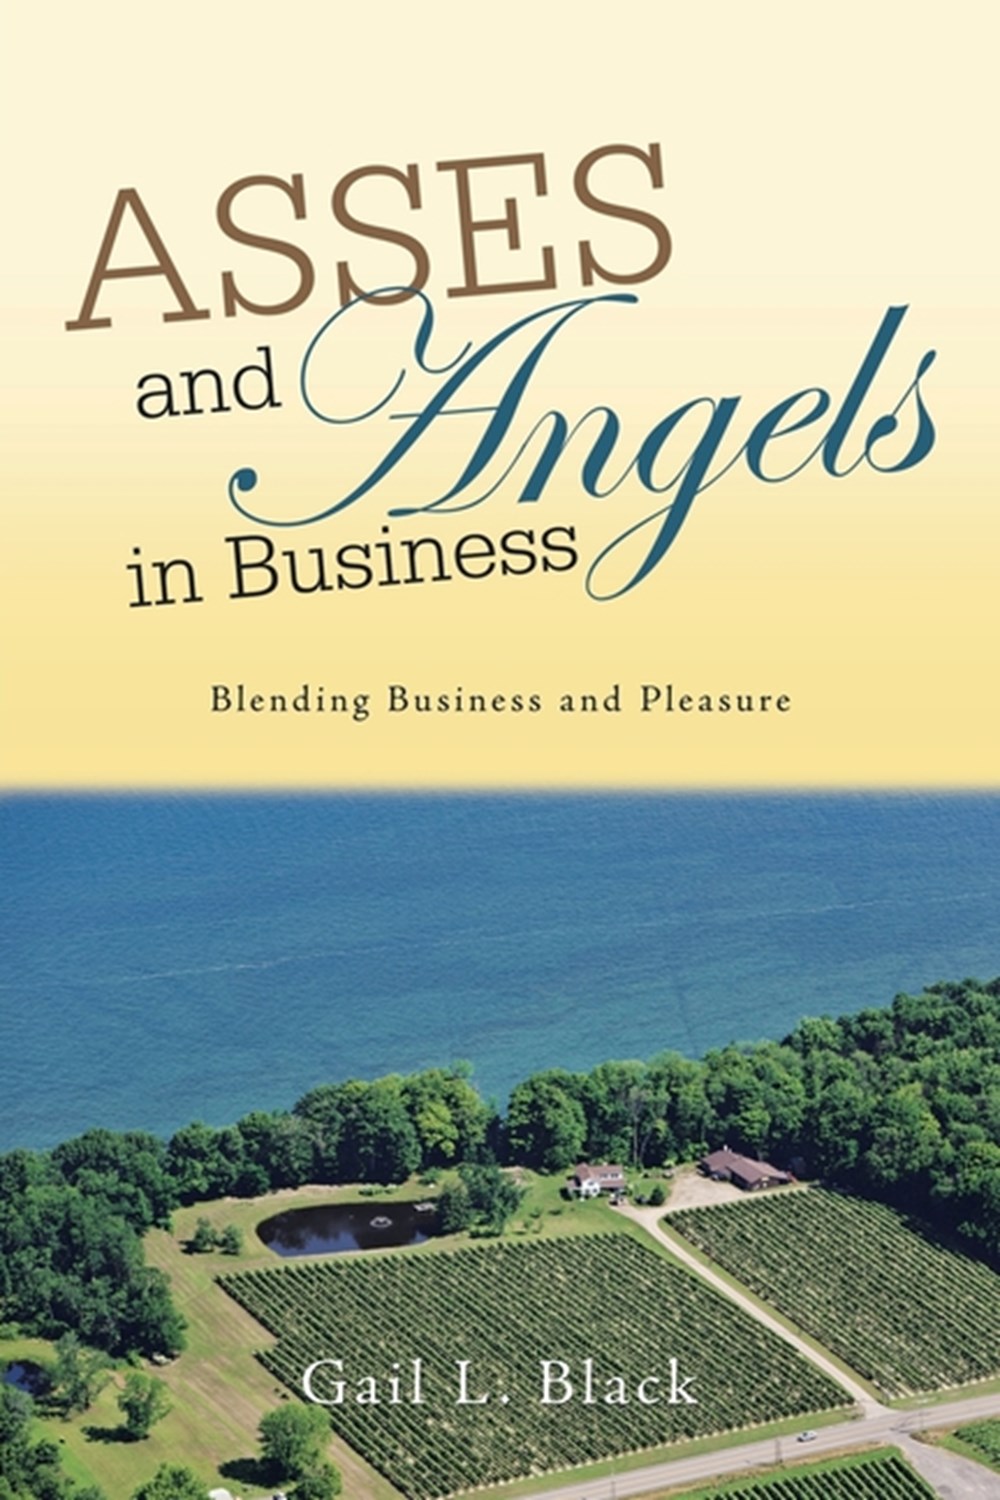 Asses and Angels in Business Blending Business and Pleasure